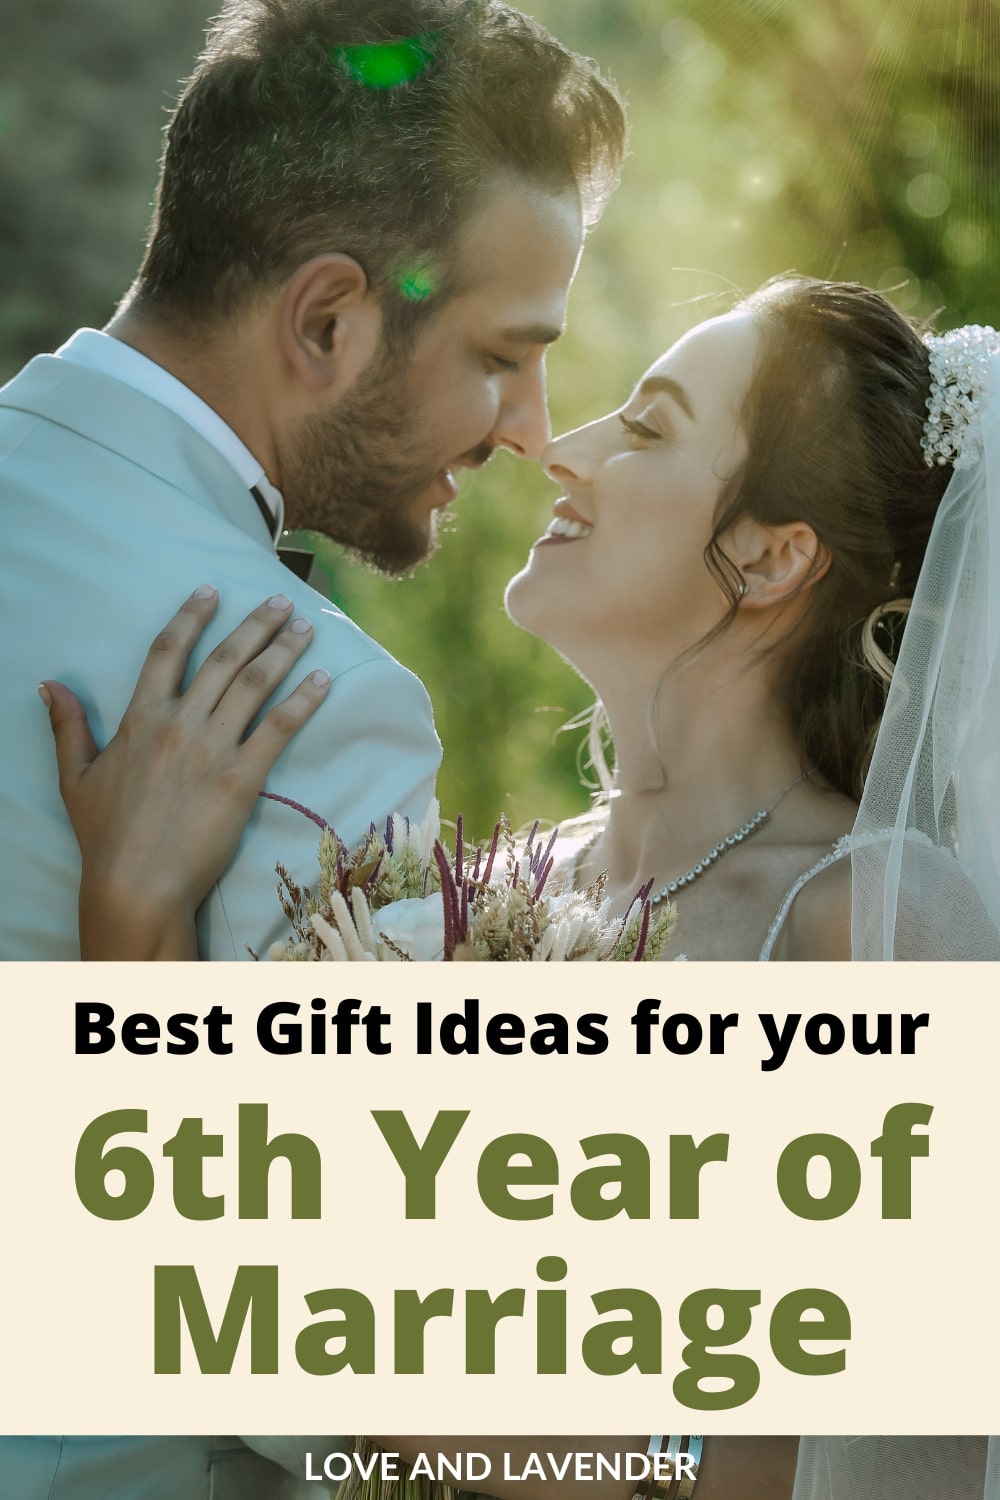 If you're stumped on what to get your husband for your 6th year anniversary, look no further! We found this great gift guide with the best iron anniversary gift ideas. Check it out!